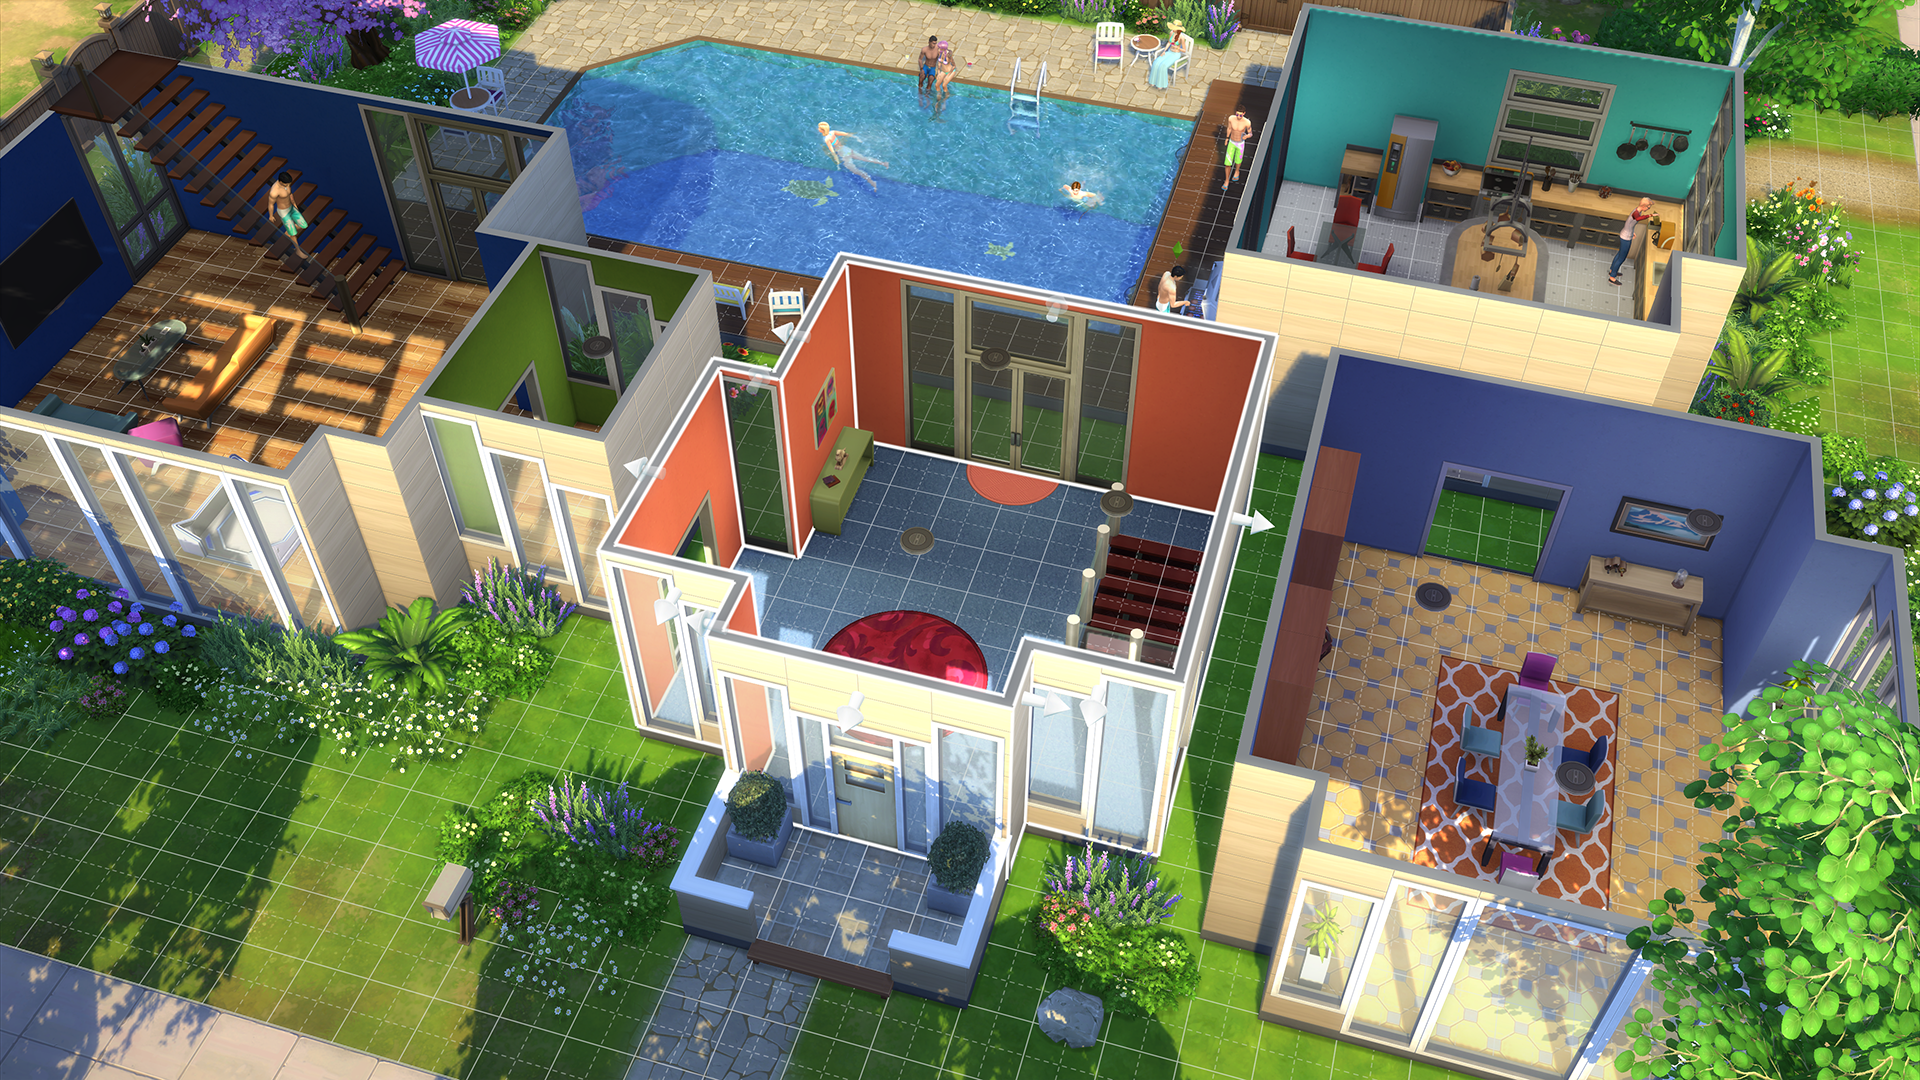 A still from The Sims 4. (Courtesy Electronic Arts)